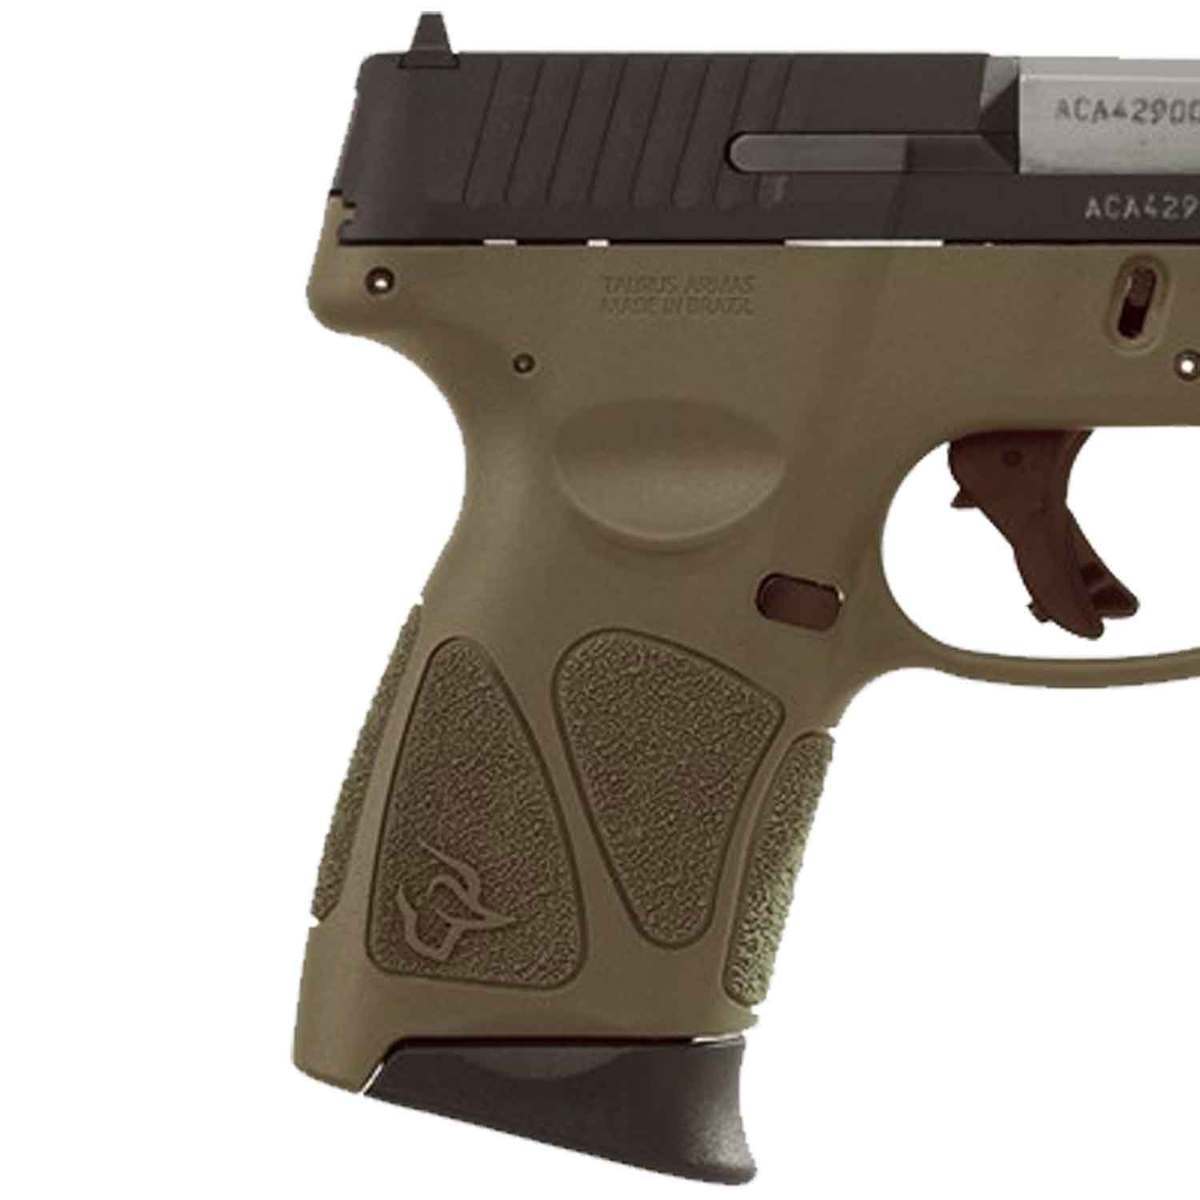 taurus-g3c-9mm-luger-3-2in-black-od-green-pistol-12-1-rounds